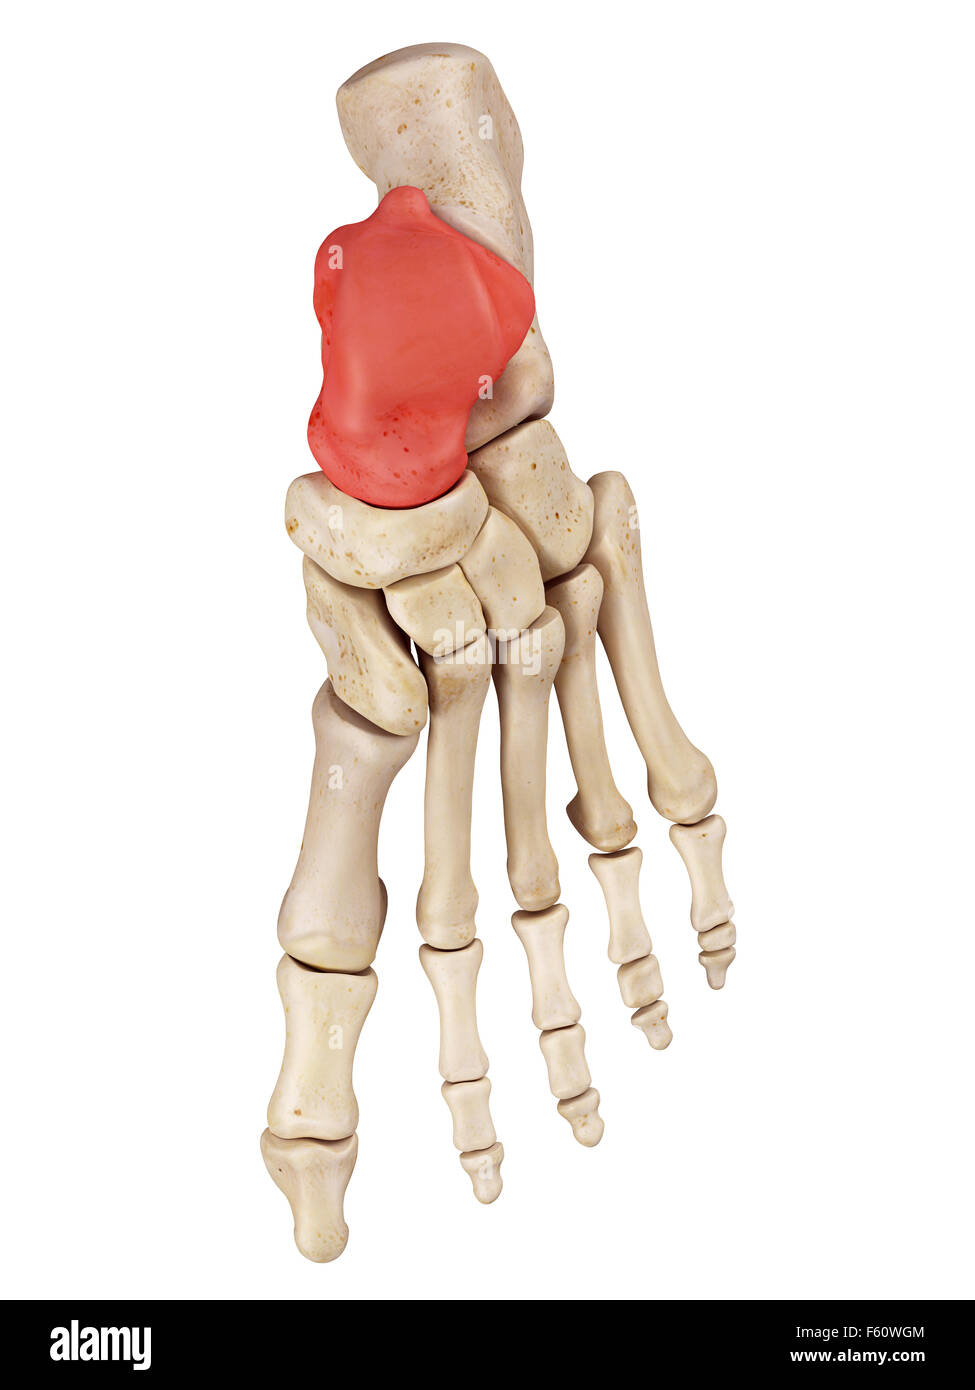 medical accurate illustration of the talus bone Stock Photo